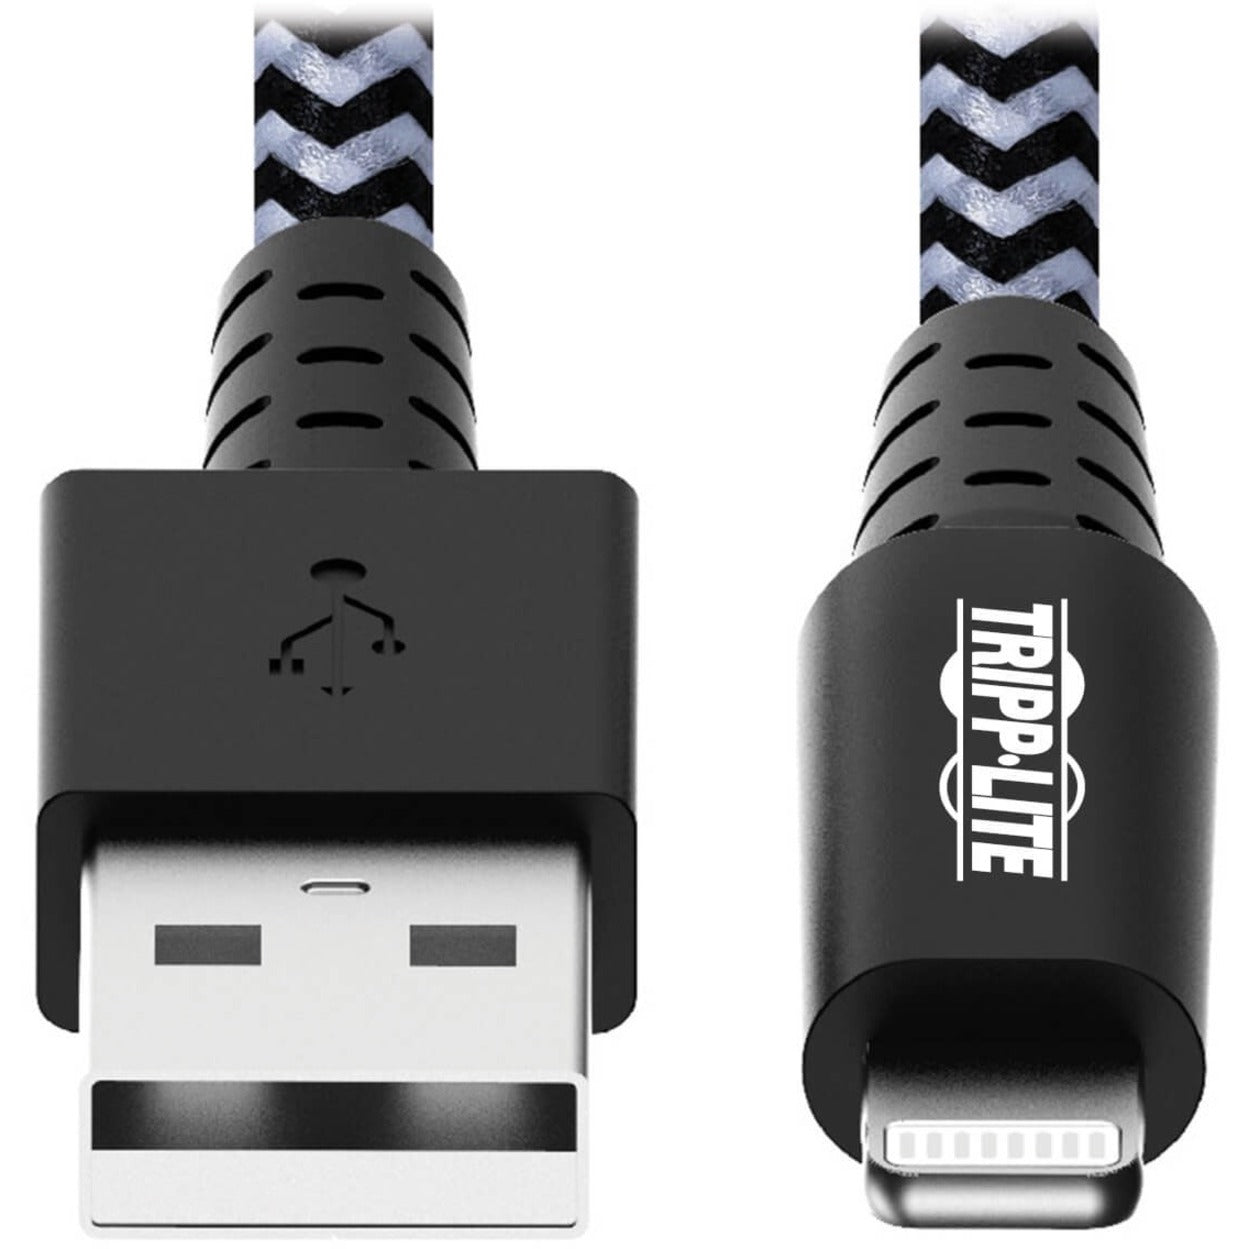 Tripp Lite M100-010-HD Heavy-Duty USB Sync/Charge Cable with Lightning Connector, 10 ft. (3 m)